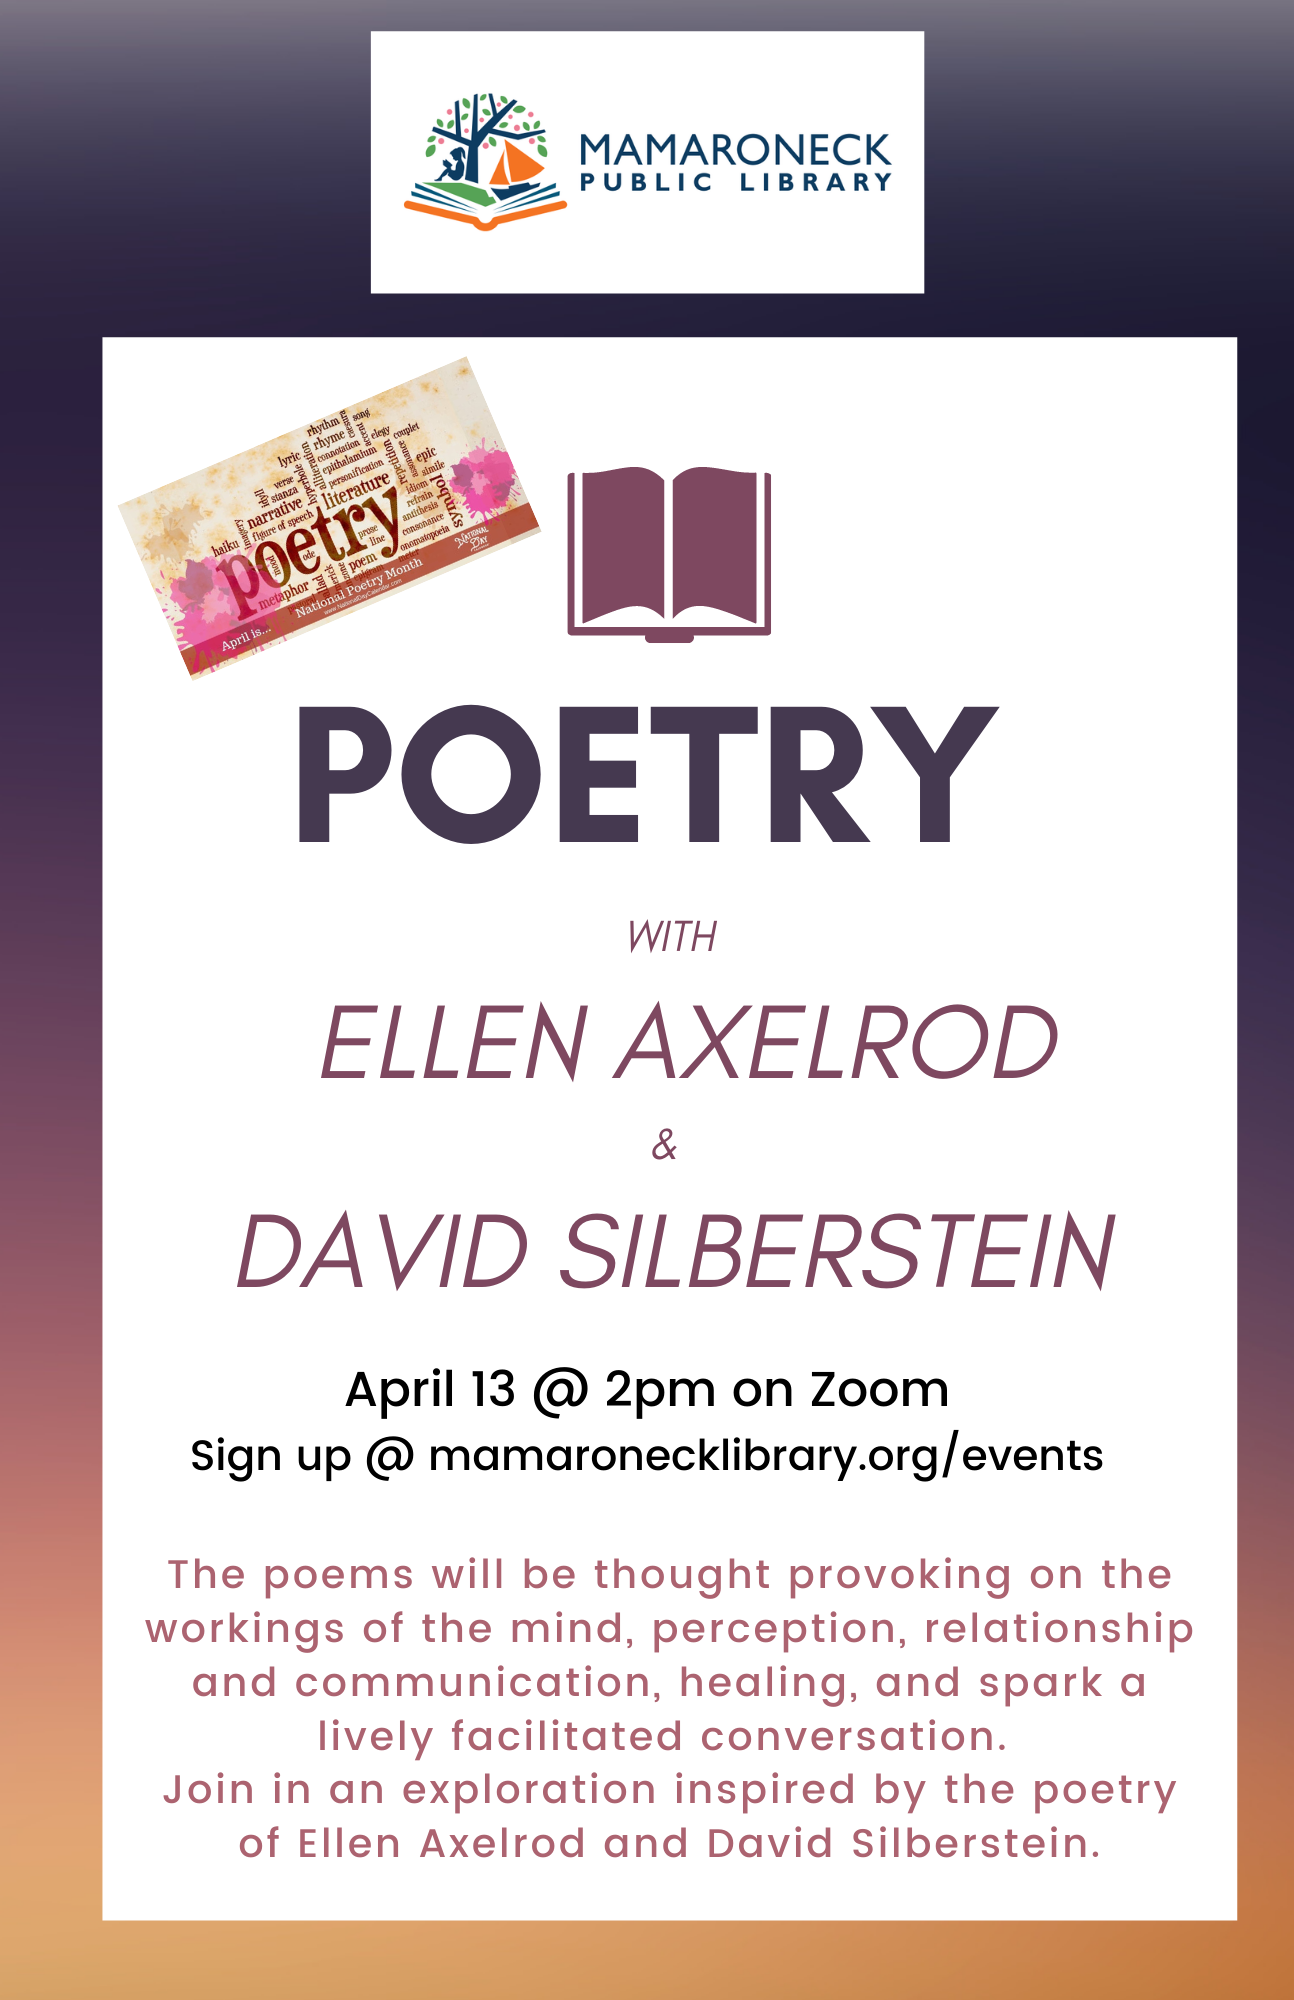 Poetry with Ellen Axelrod and David Silbersetin April 13